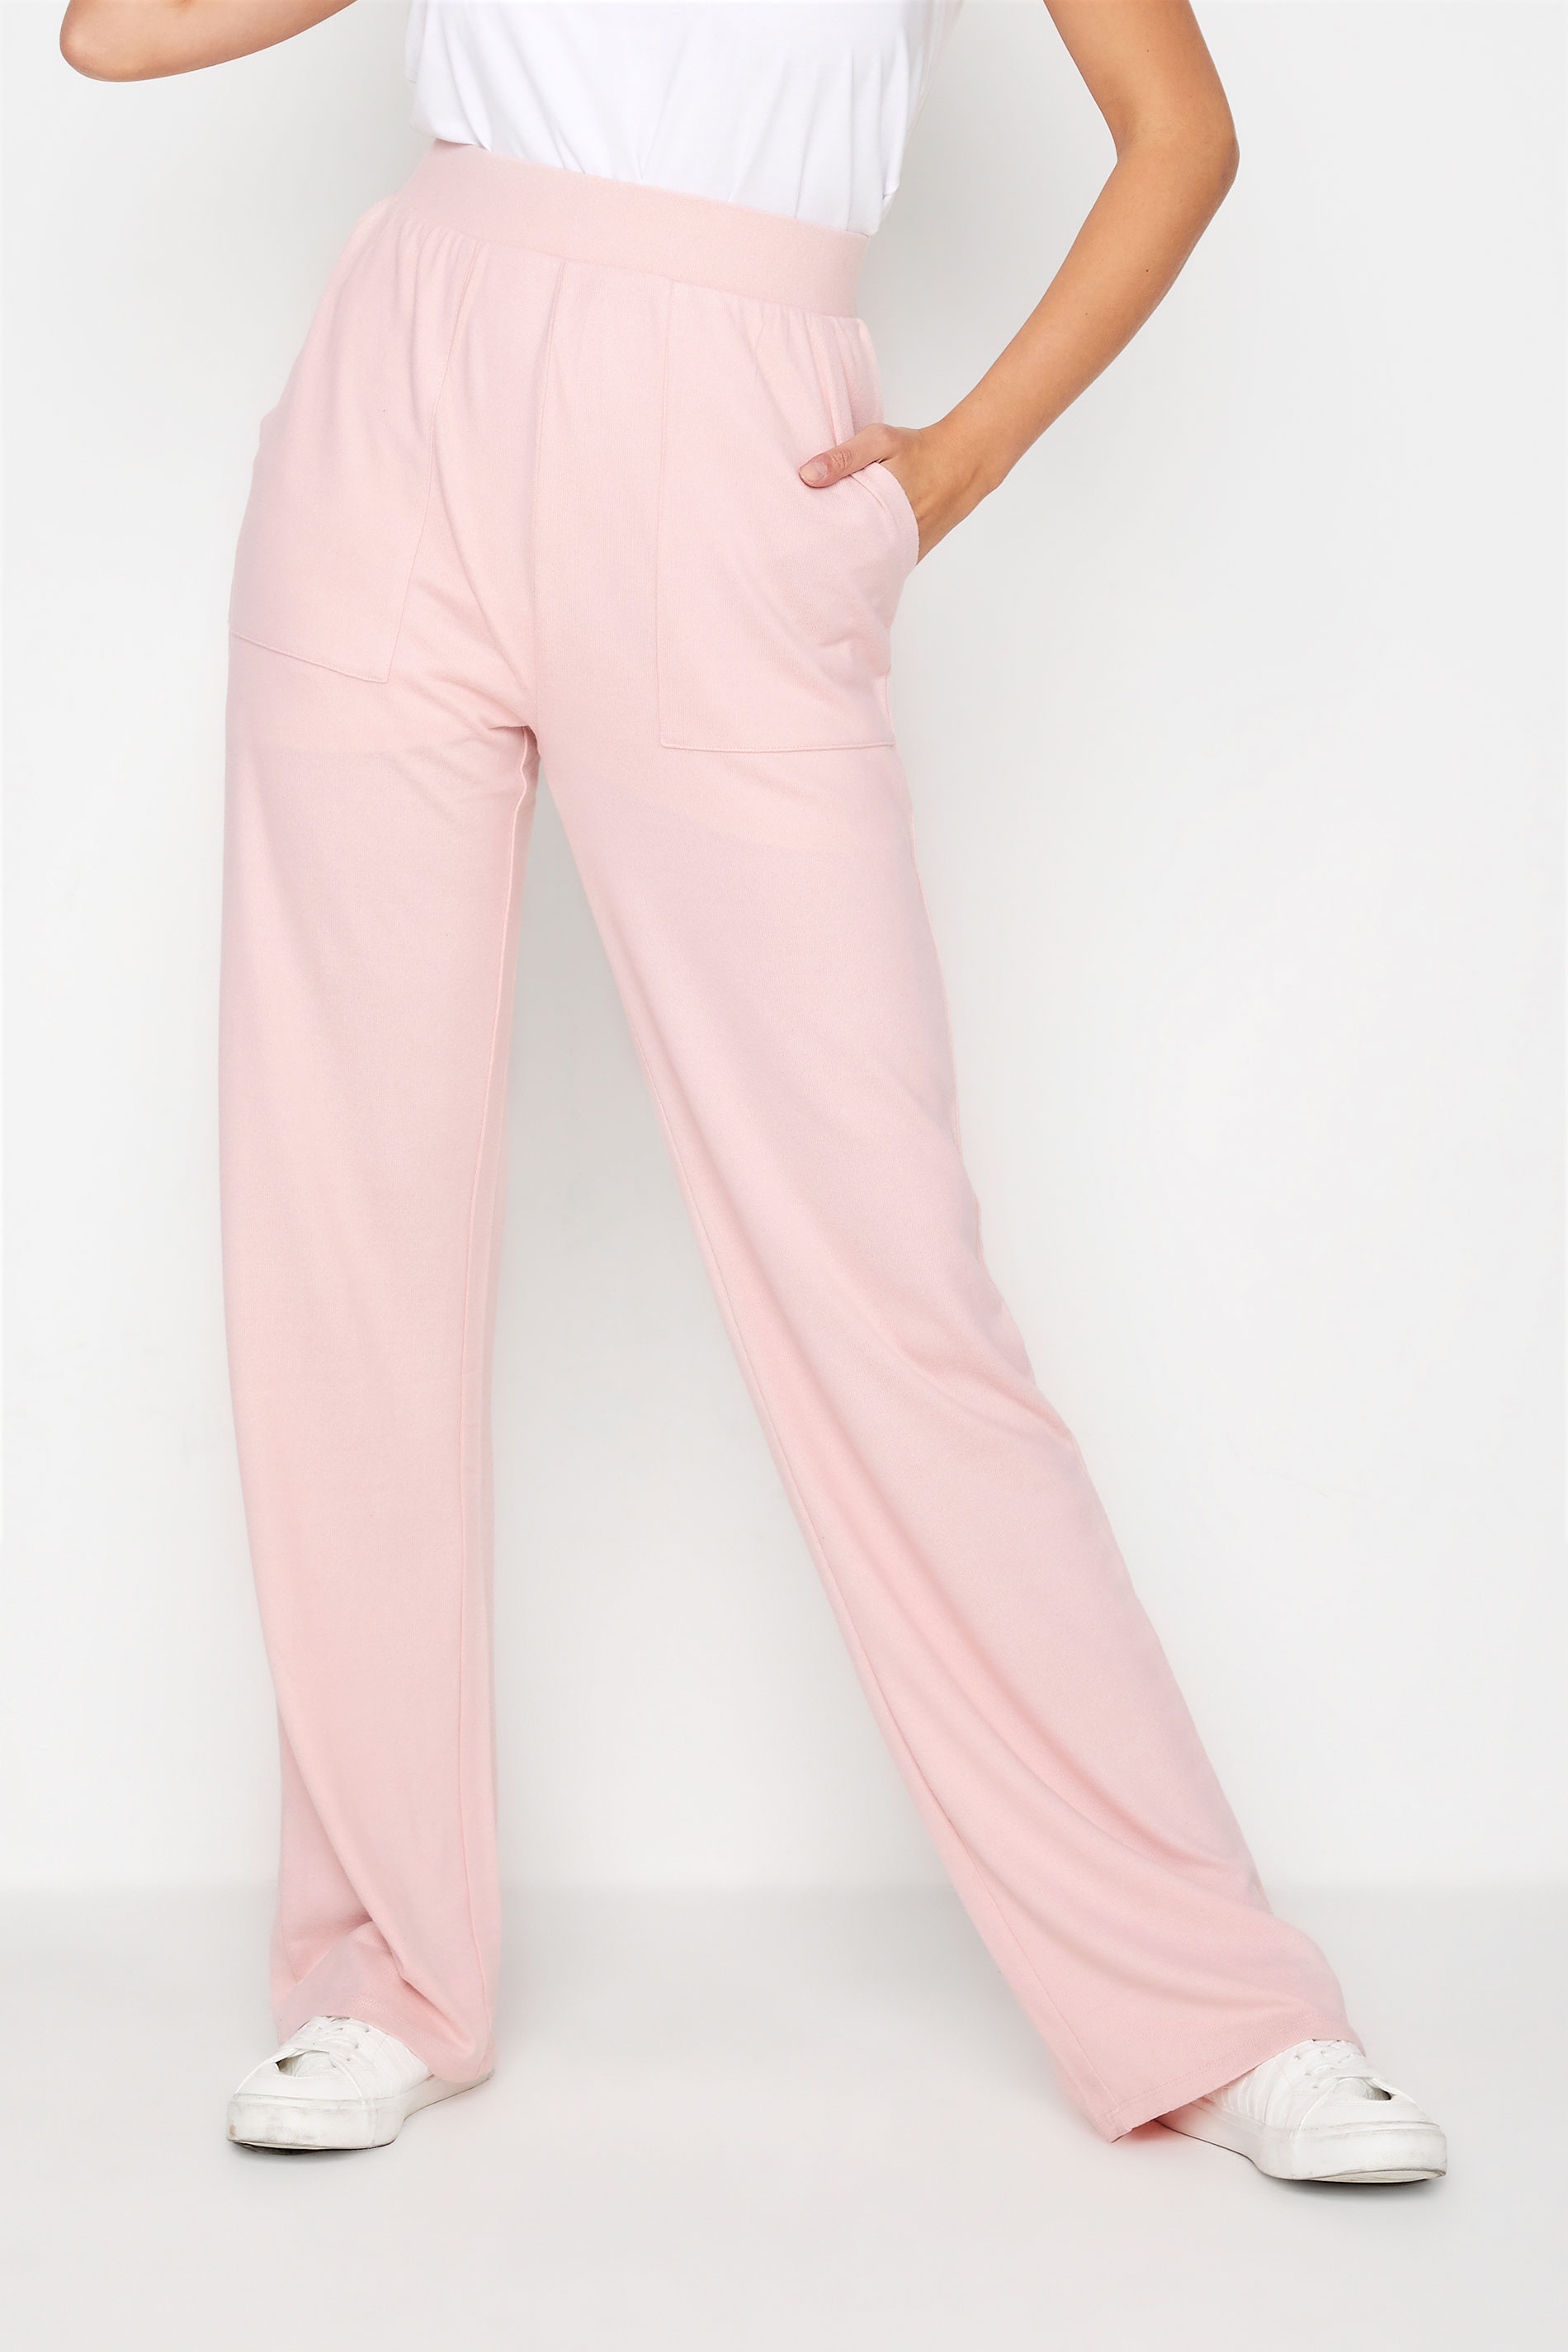 LTS Pink Soft Touch Straight Leg Joggers_A.jpg